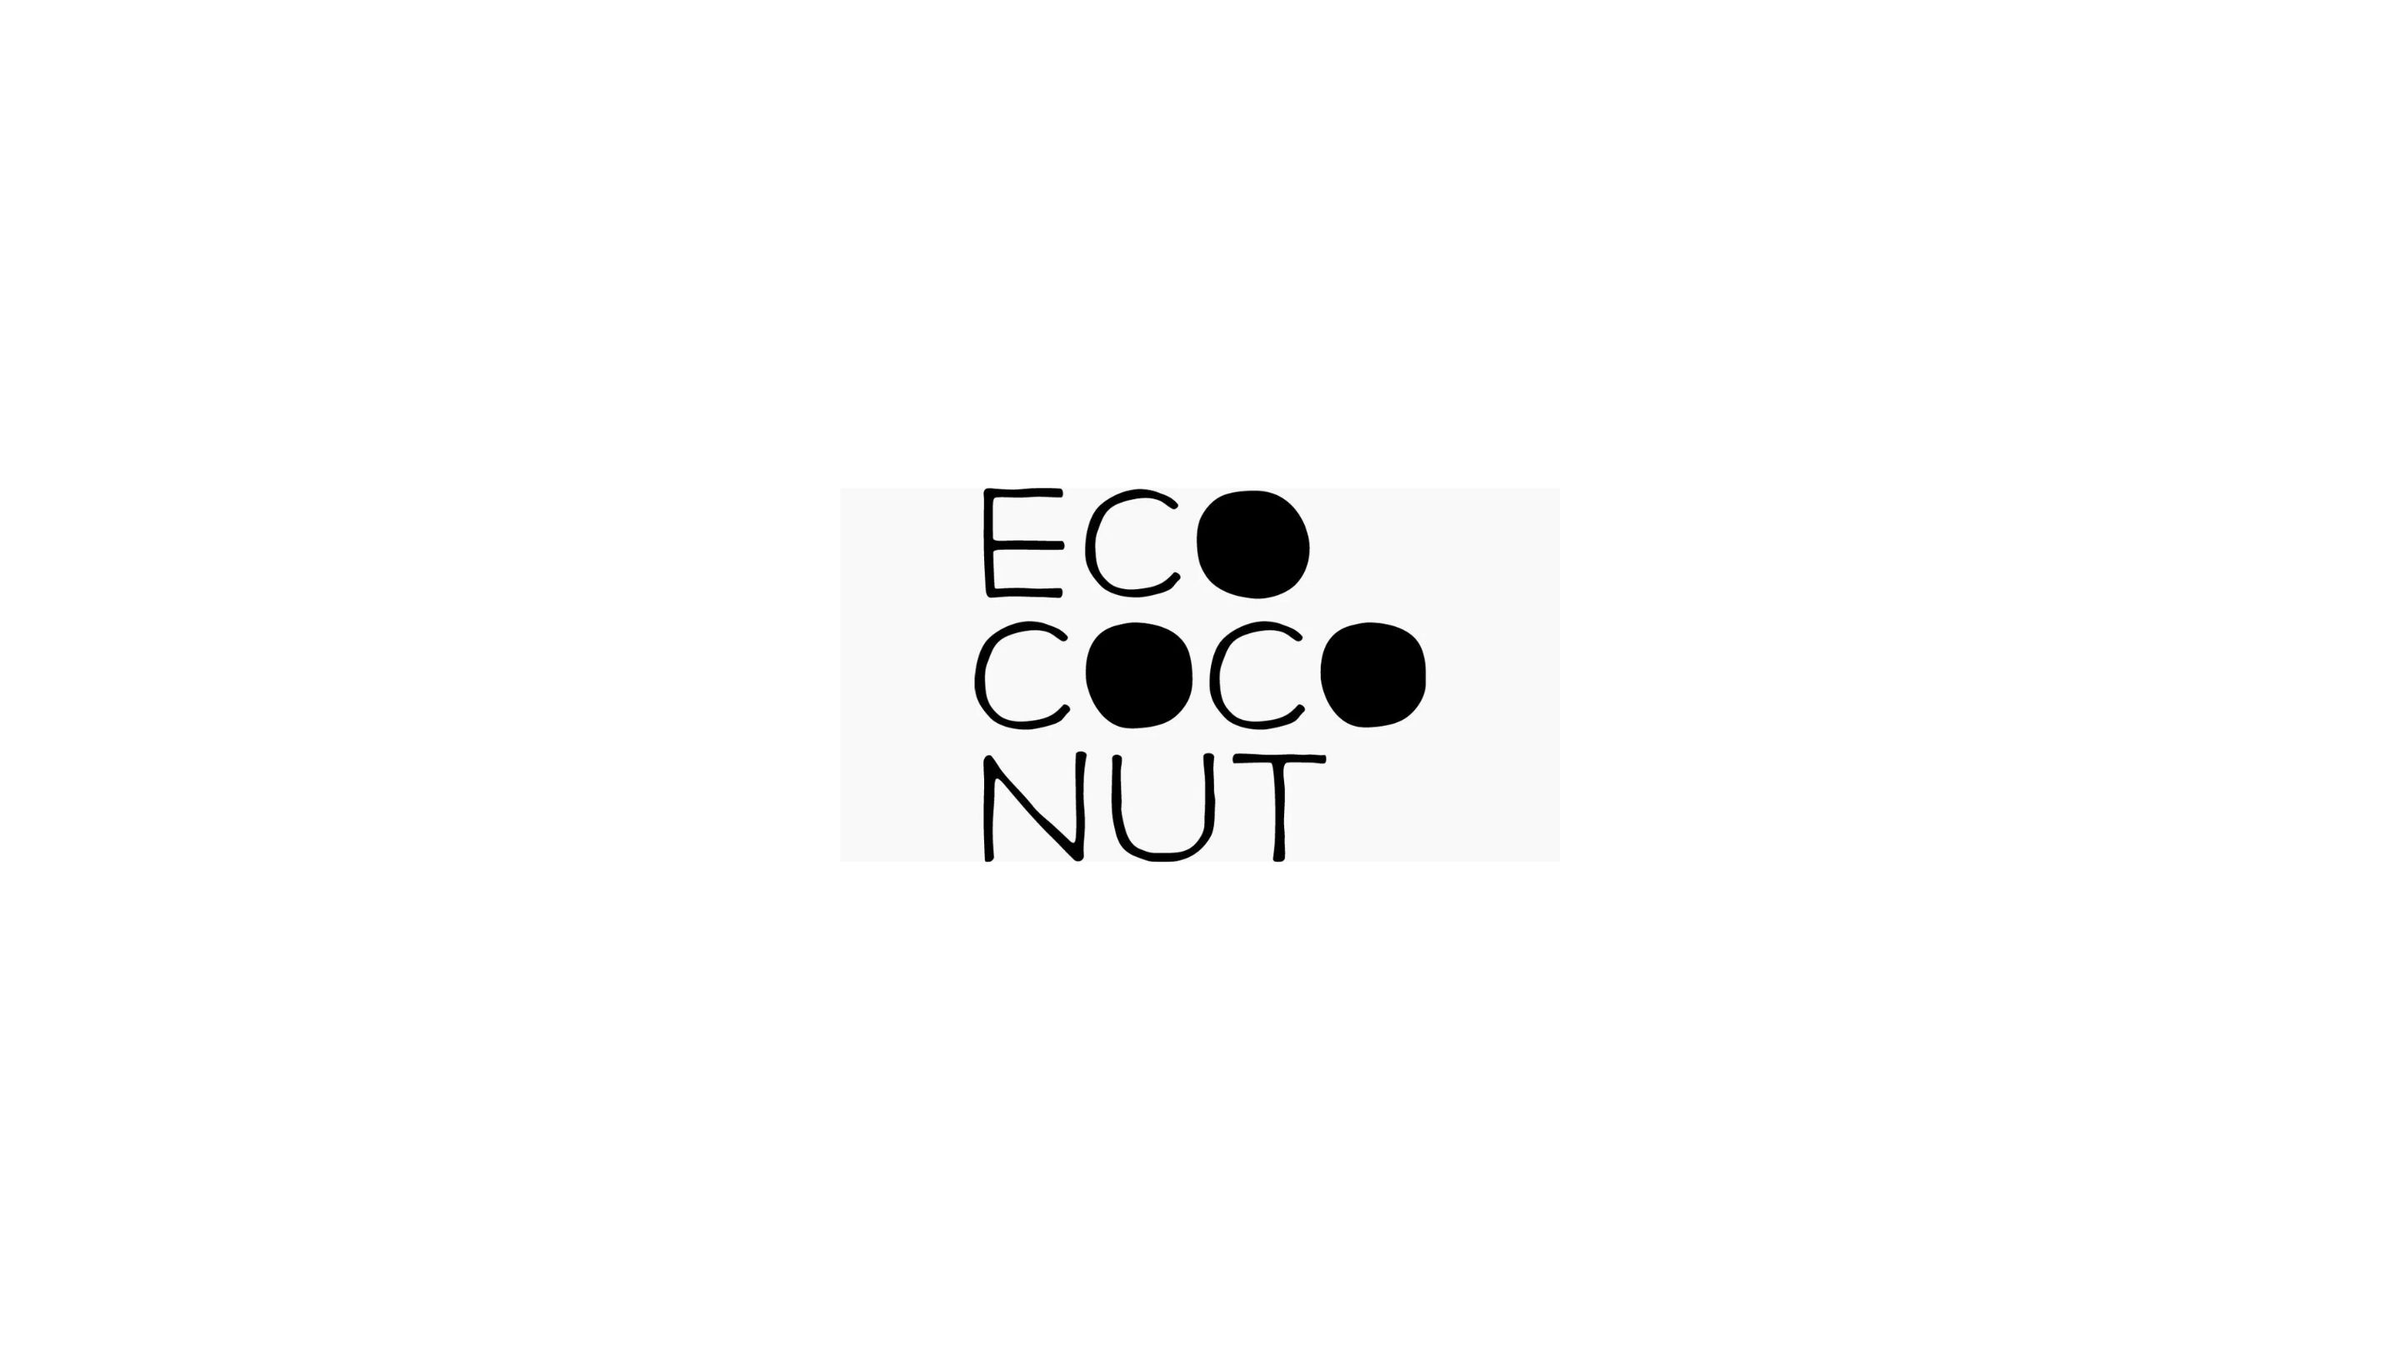 eco coconut in black thin hand drawn text. The O's are solid and look a bit like coconuts!